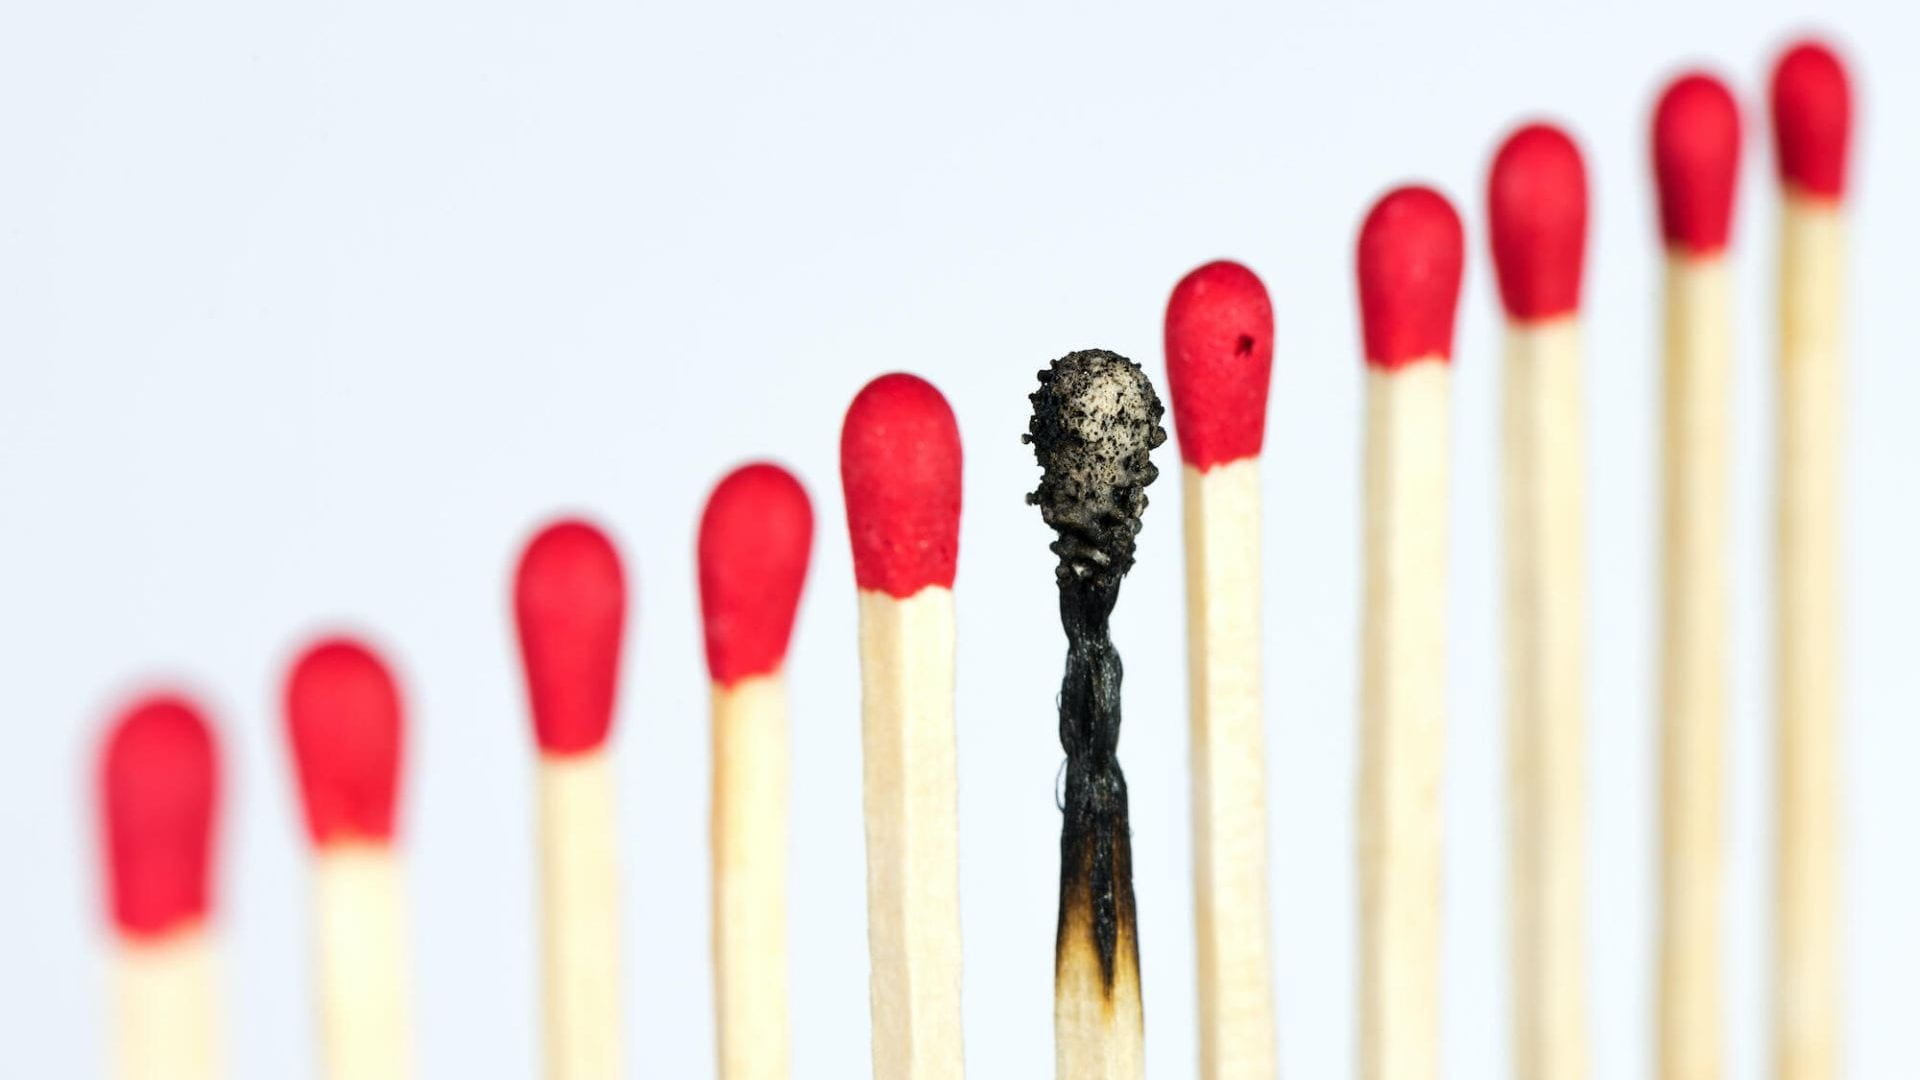 A set of matches with the middle match burned